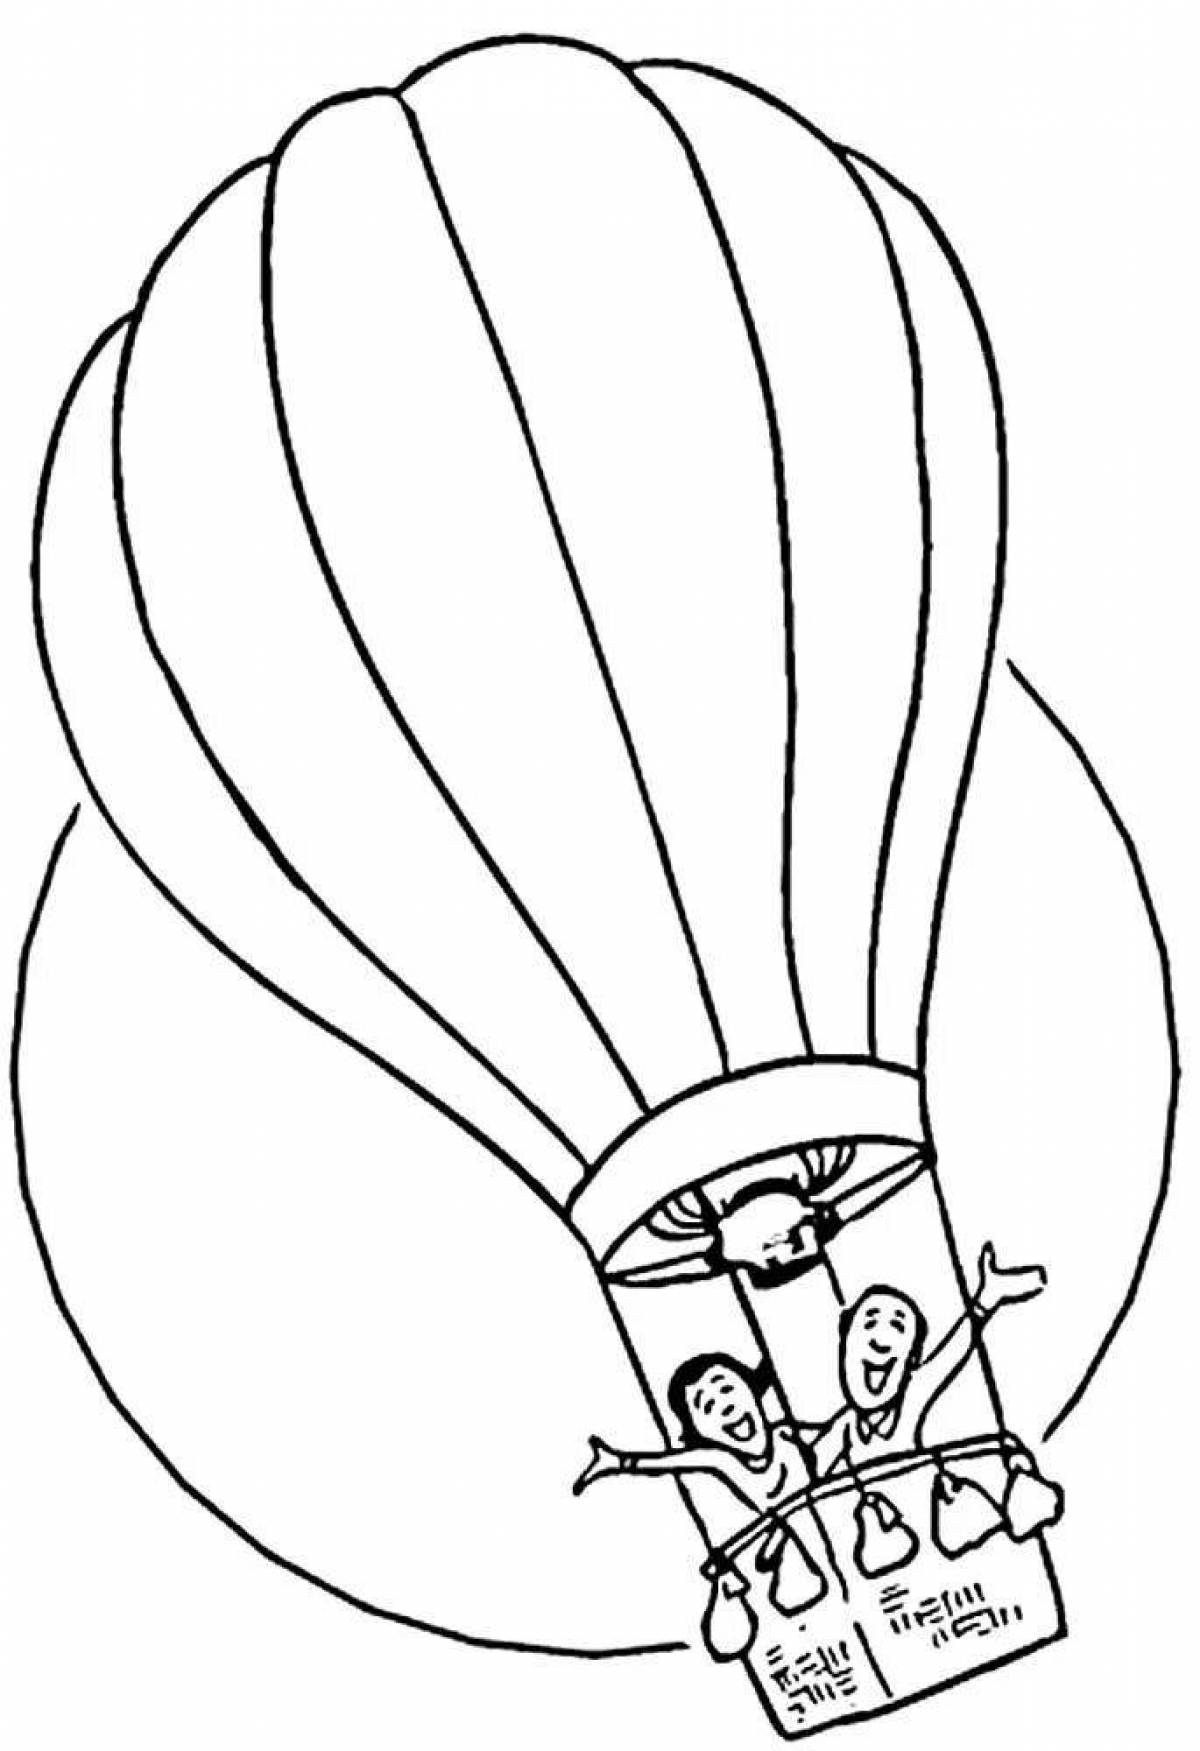 Coloring book playful balloon with a basket for children